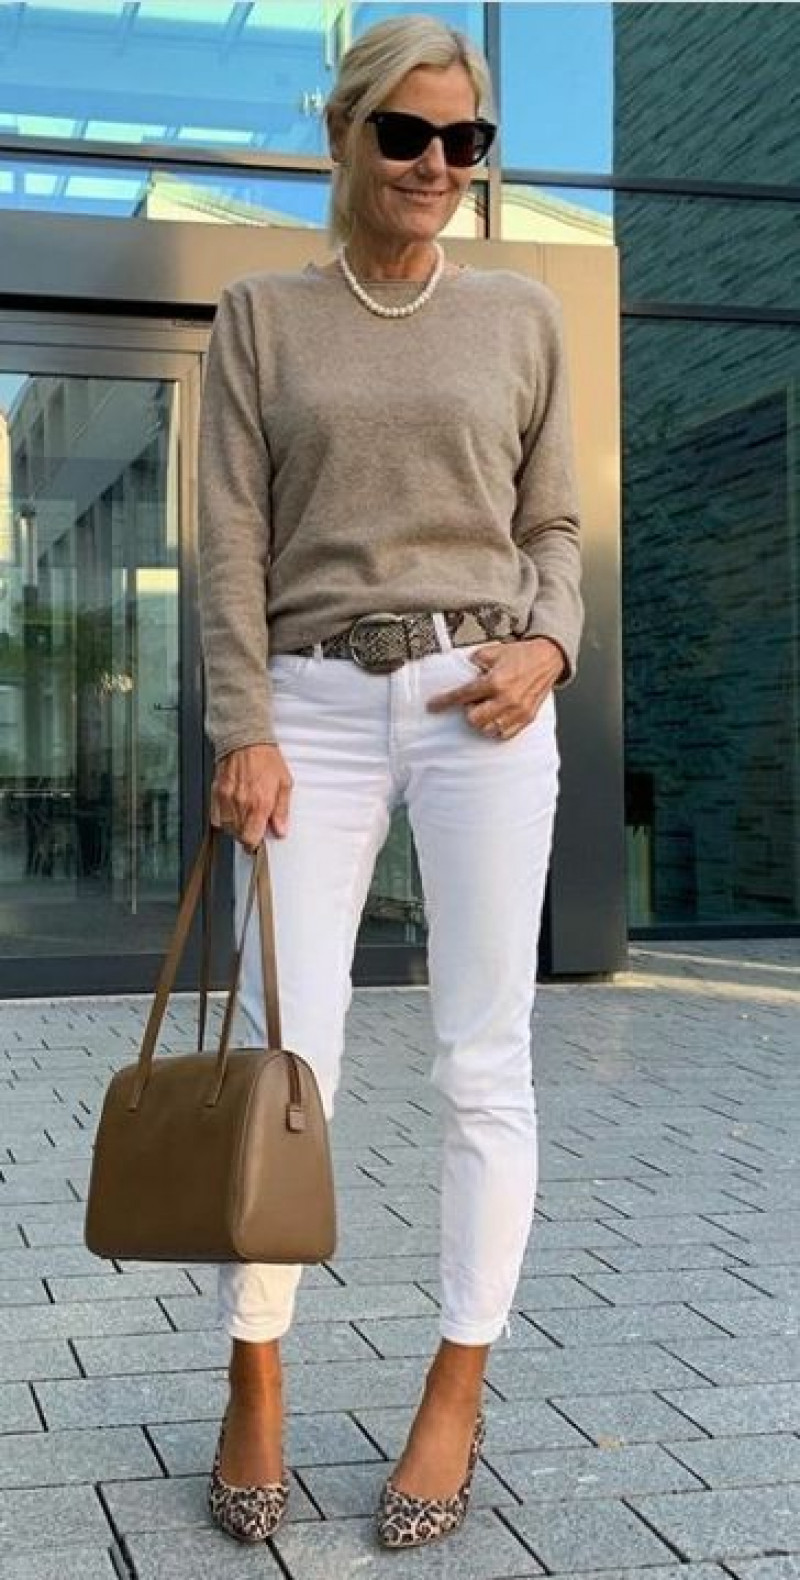 Beige Long Sleeves Sweatshirt, White Cotton Casual Trouser, Dress Over 50